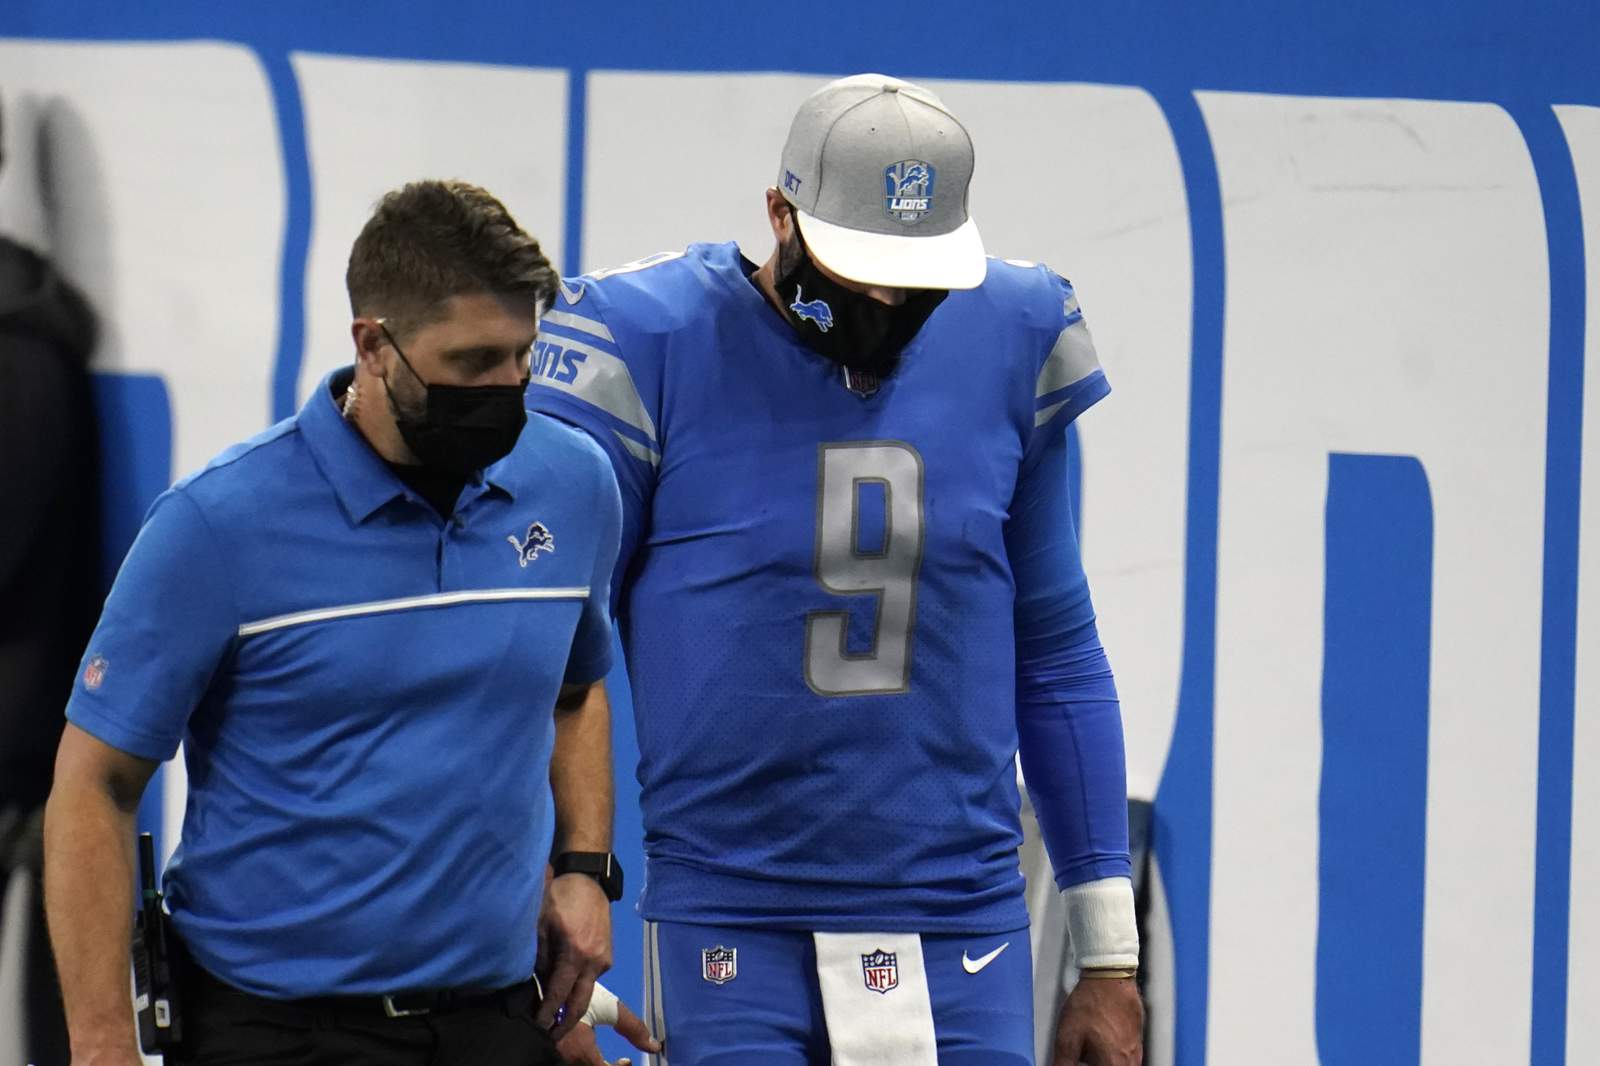 Lions will hold out hope all week that Stafford can play